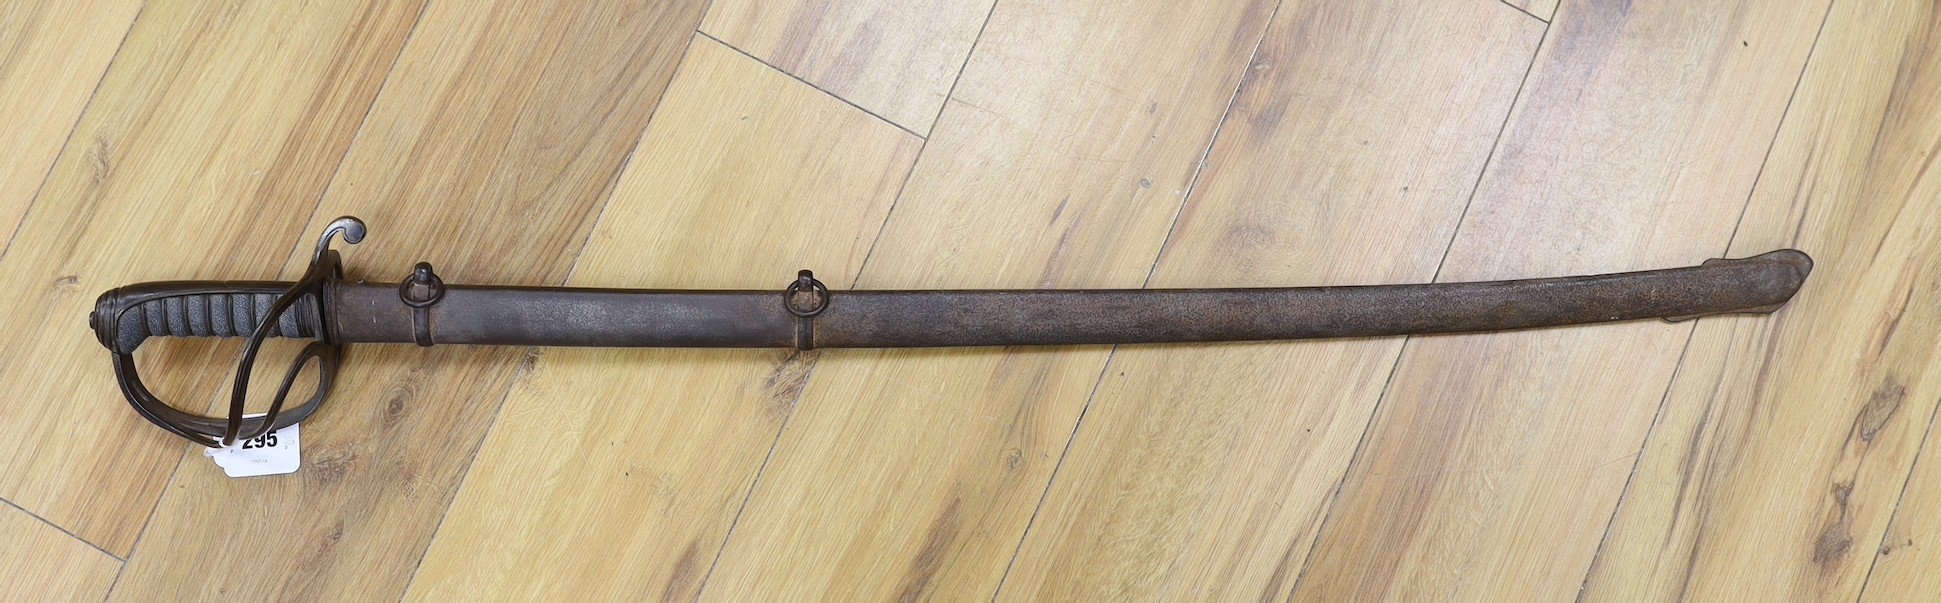 A Victorian 1821 pattern Hawkes & Co sword and scabbard, 104cm total length